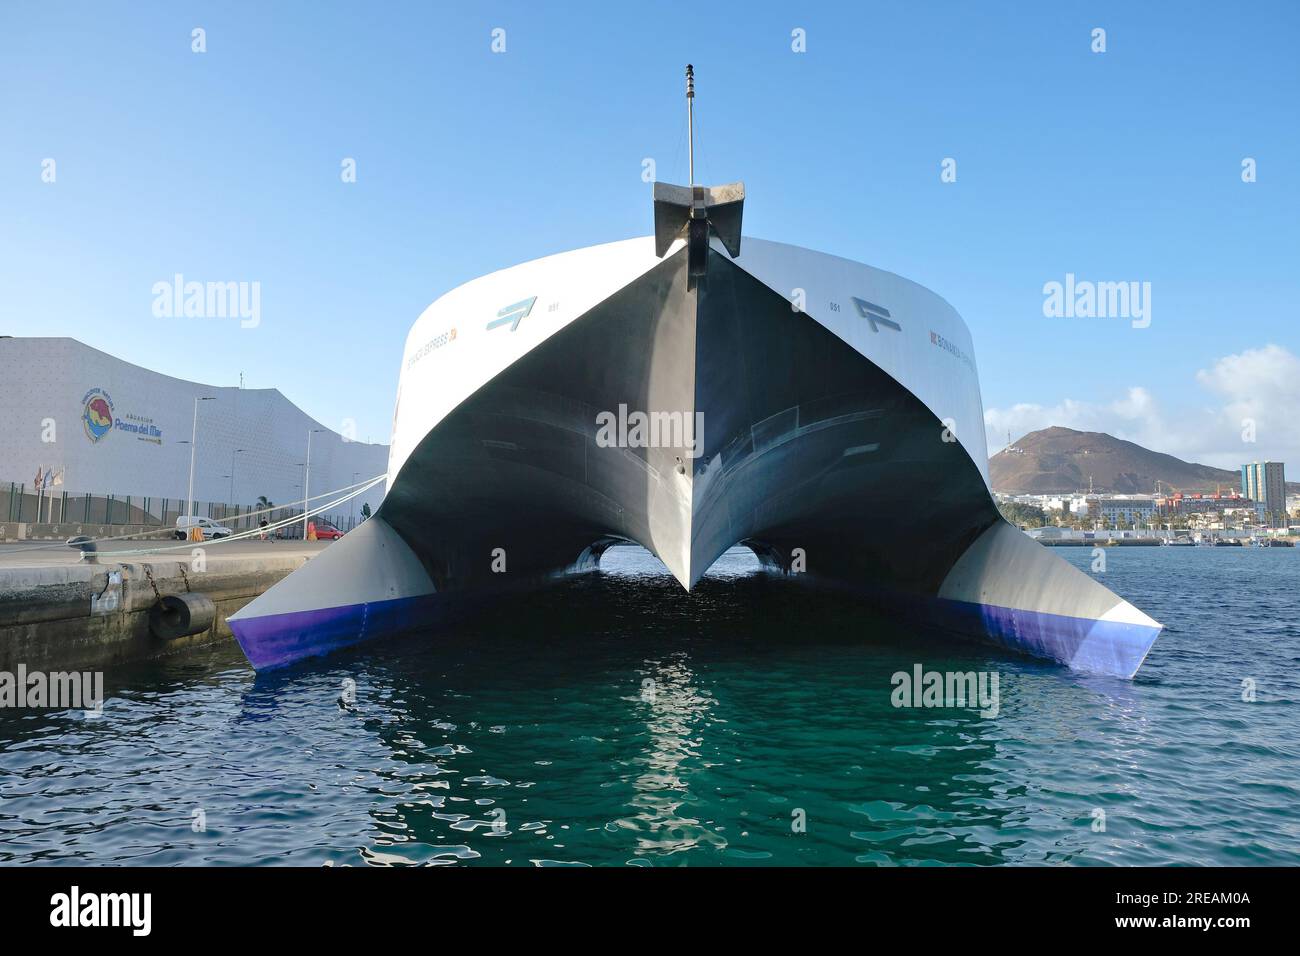 Las Palmas, Canary Islands / Spain - September 11 2020: Fast catamaran ferry Fred Olsen Bonanza Express getting ready to depart from the harbor. Stock Photo